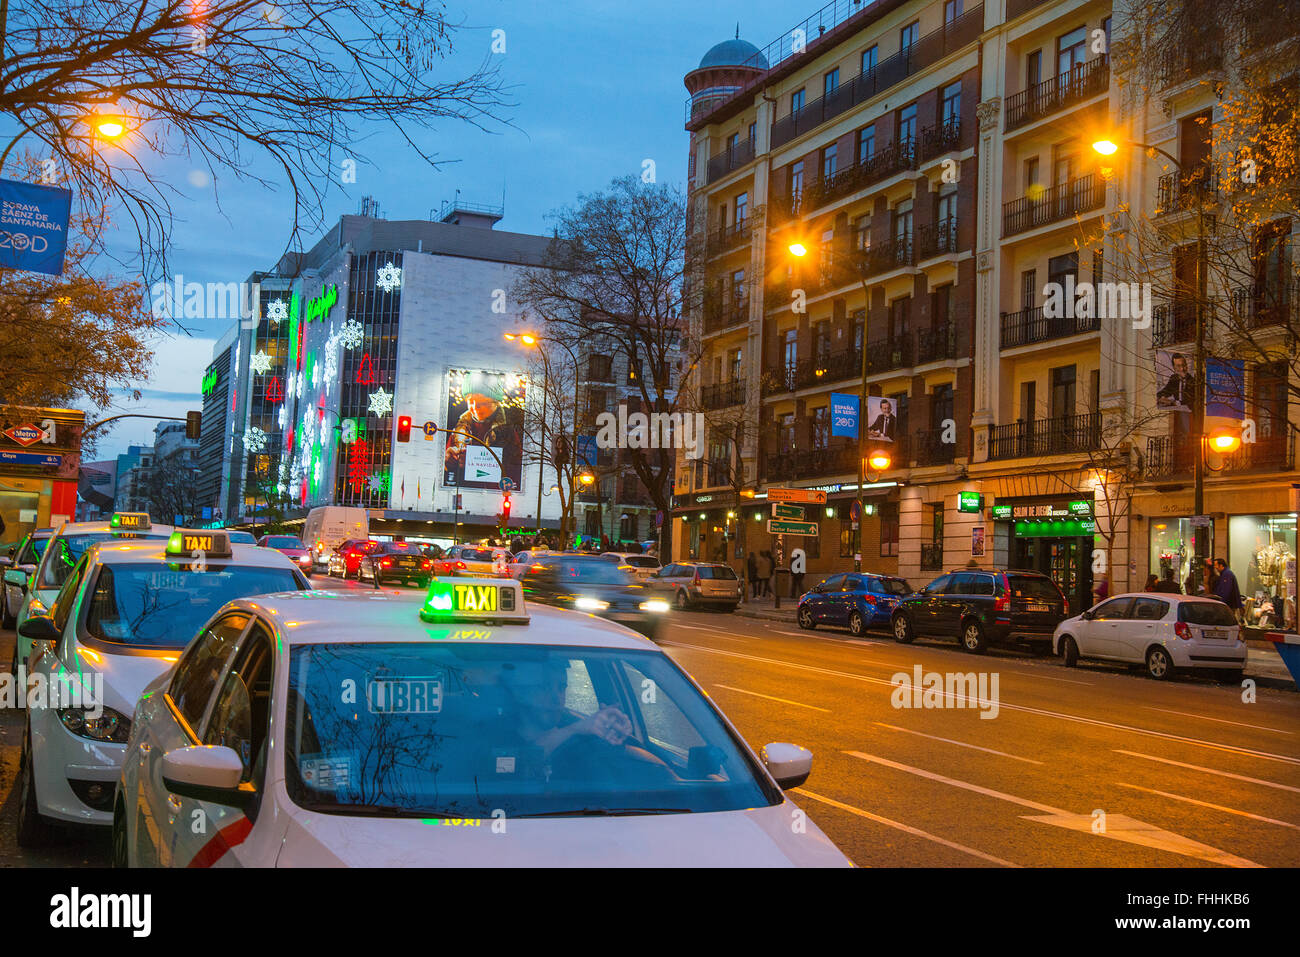 Taxi stand in Goya street, night view. Madrid, Spain. Stock Photo